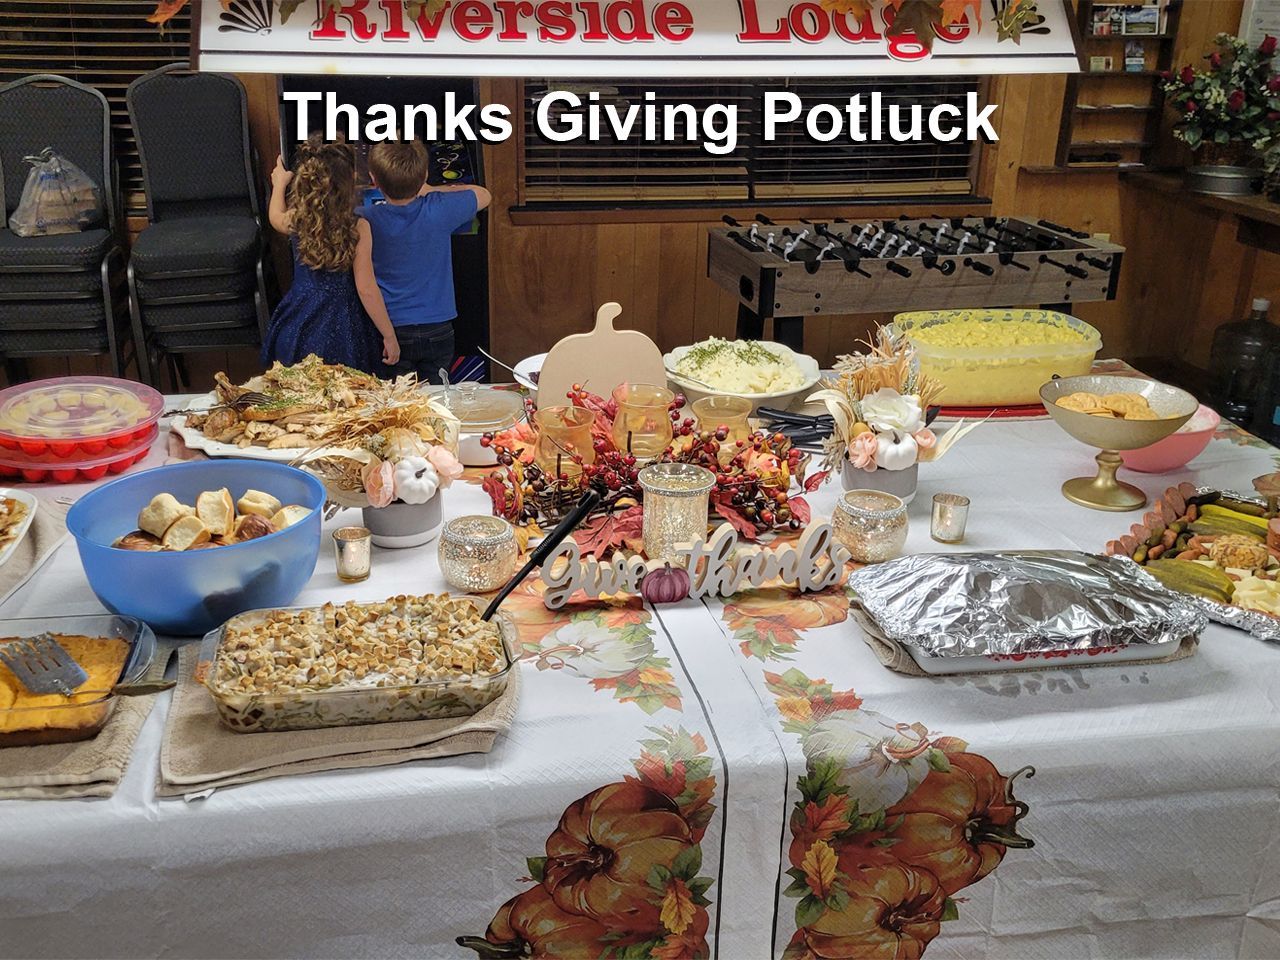 a thanksgiving potluck is being held at the riverside lodge